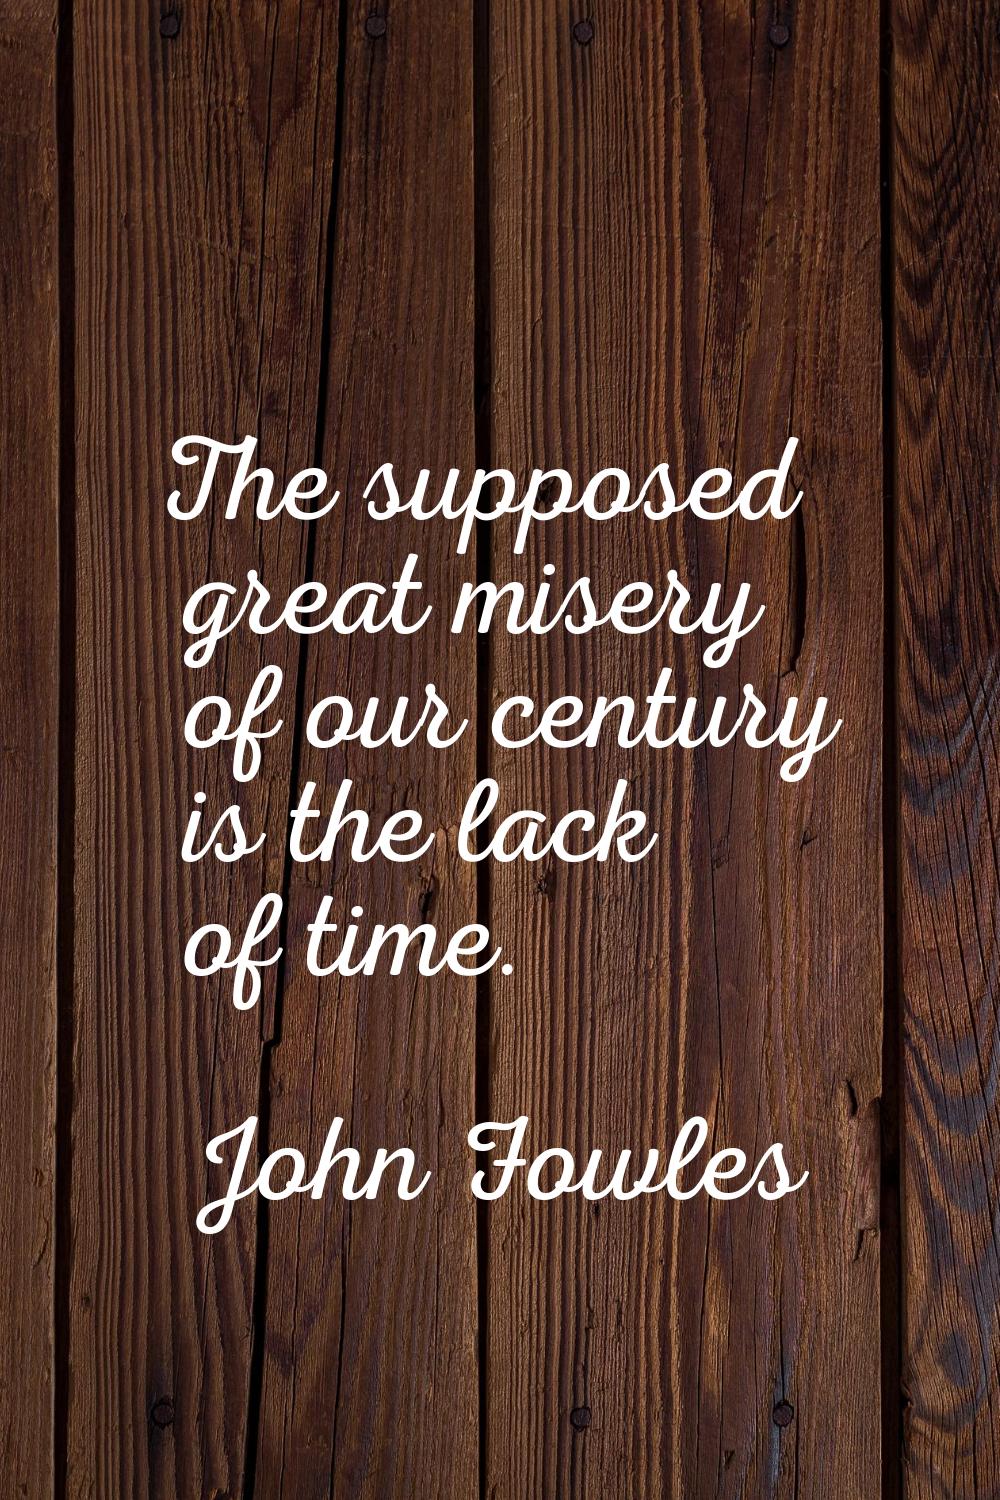 The supposed great misery of our century is the lack of time.